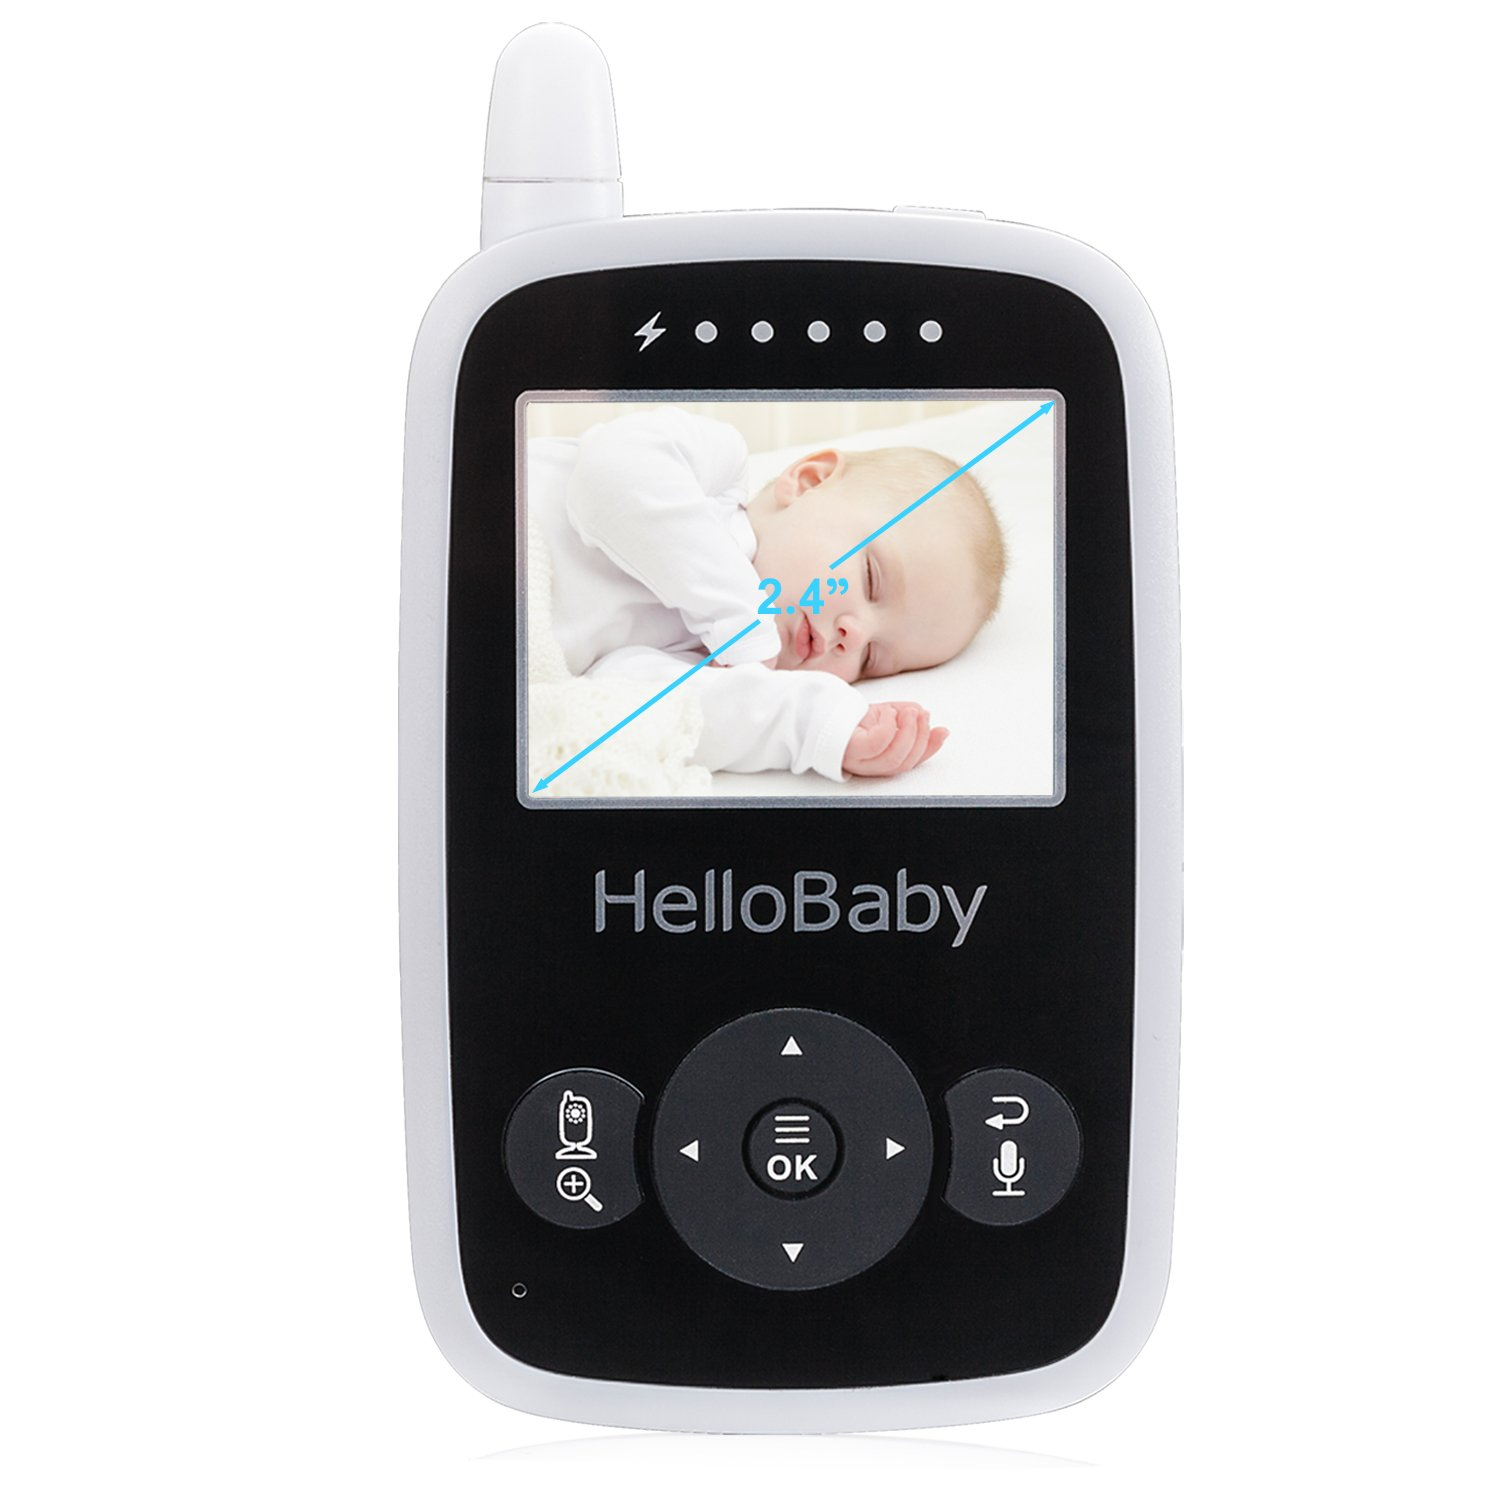 HelloBaby Baby Monitor-HB6336 with Camera and Audio, 3.2 IPS Color  Display, Full Remote Pan Zoom, IR Night Vision, 1000 ft. Range, Wall Mount,  No